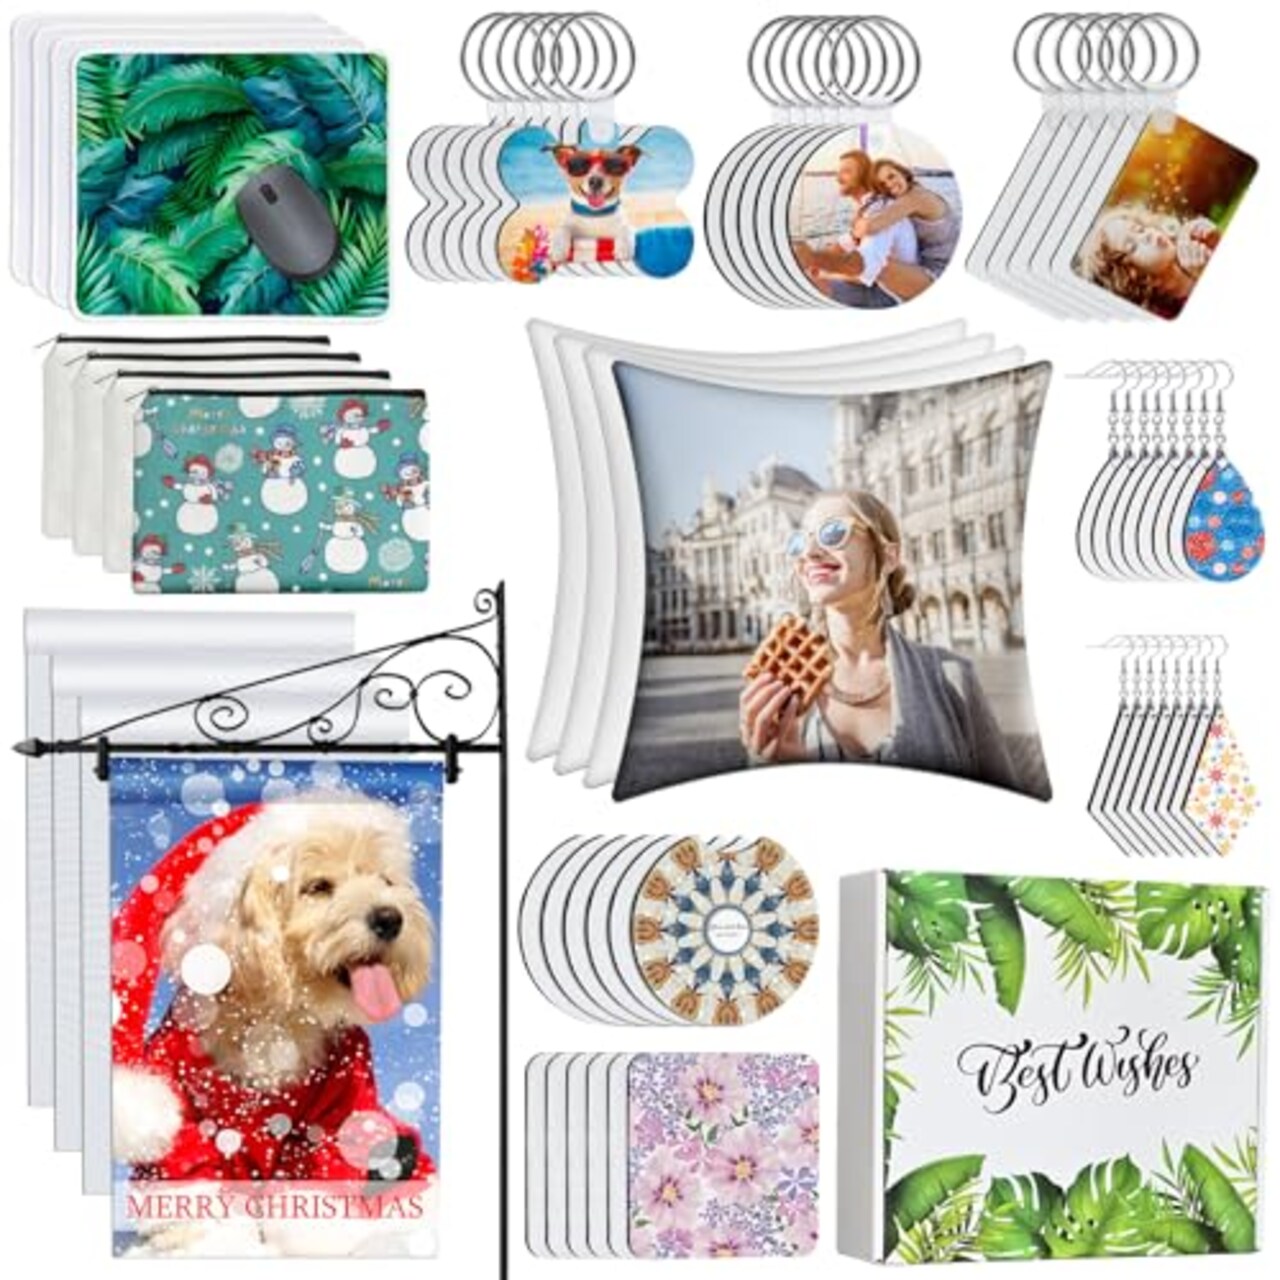 114Pcs Sublimation Blanks Products, Sublimation Blanks Set Including DIY Blank  Makeup Bag, Keychain, Earring, Pillow Cover, Mouse Pad, Coaster Garden Flag  for Sublimation Heat Transfer Christmas Craft